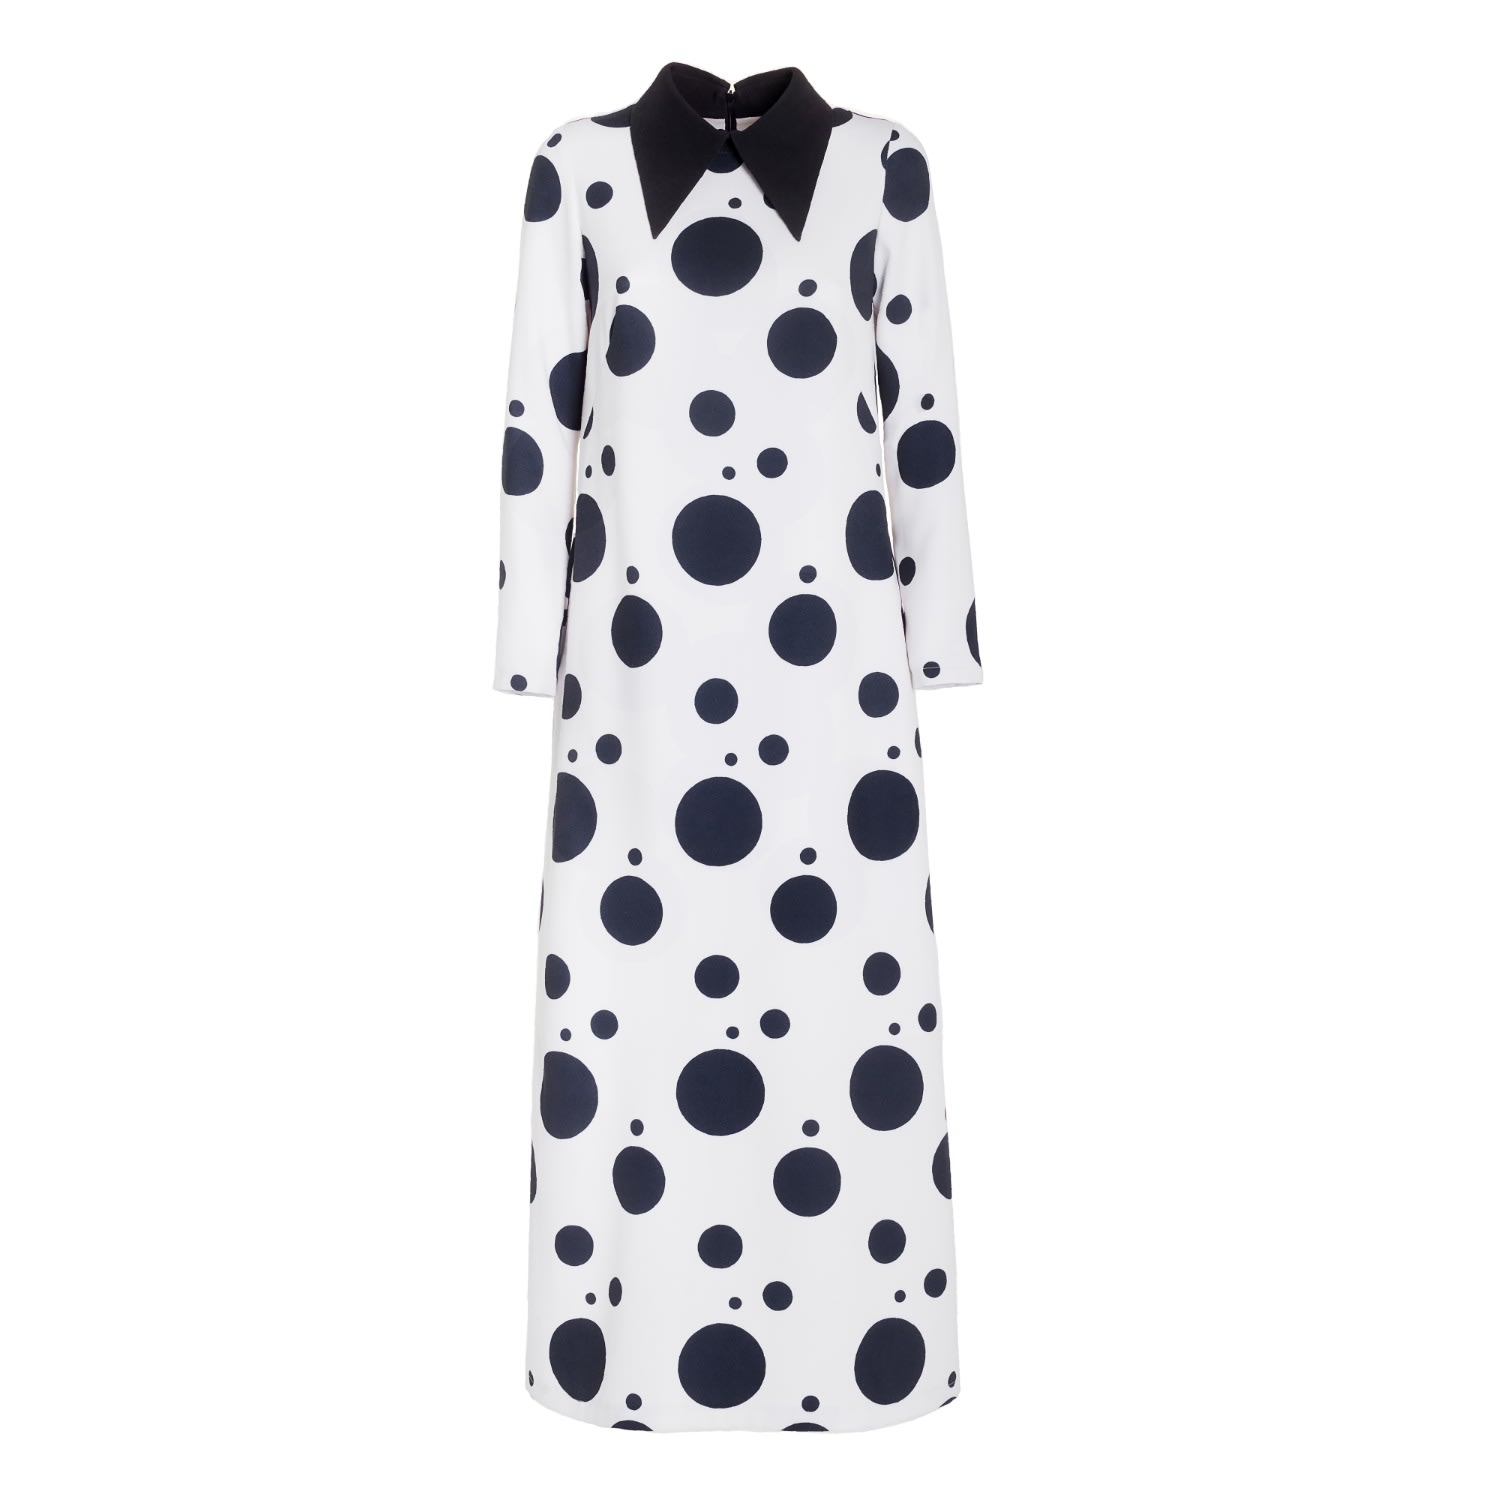 Women’s Polka Dot Dress With Stand Collar White Extra Small Julia Allert